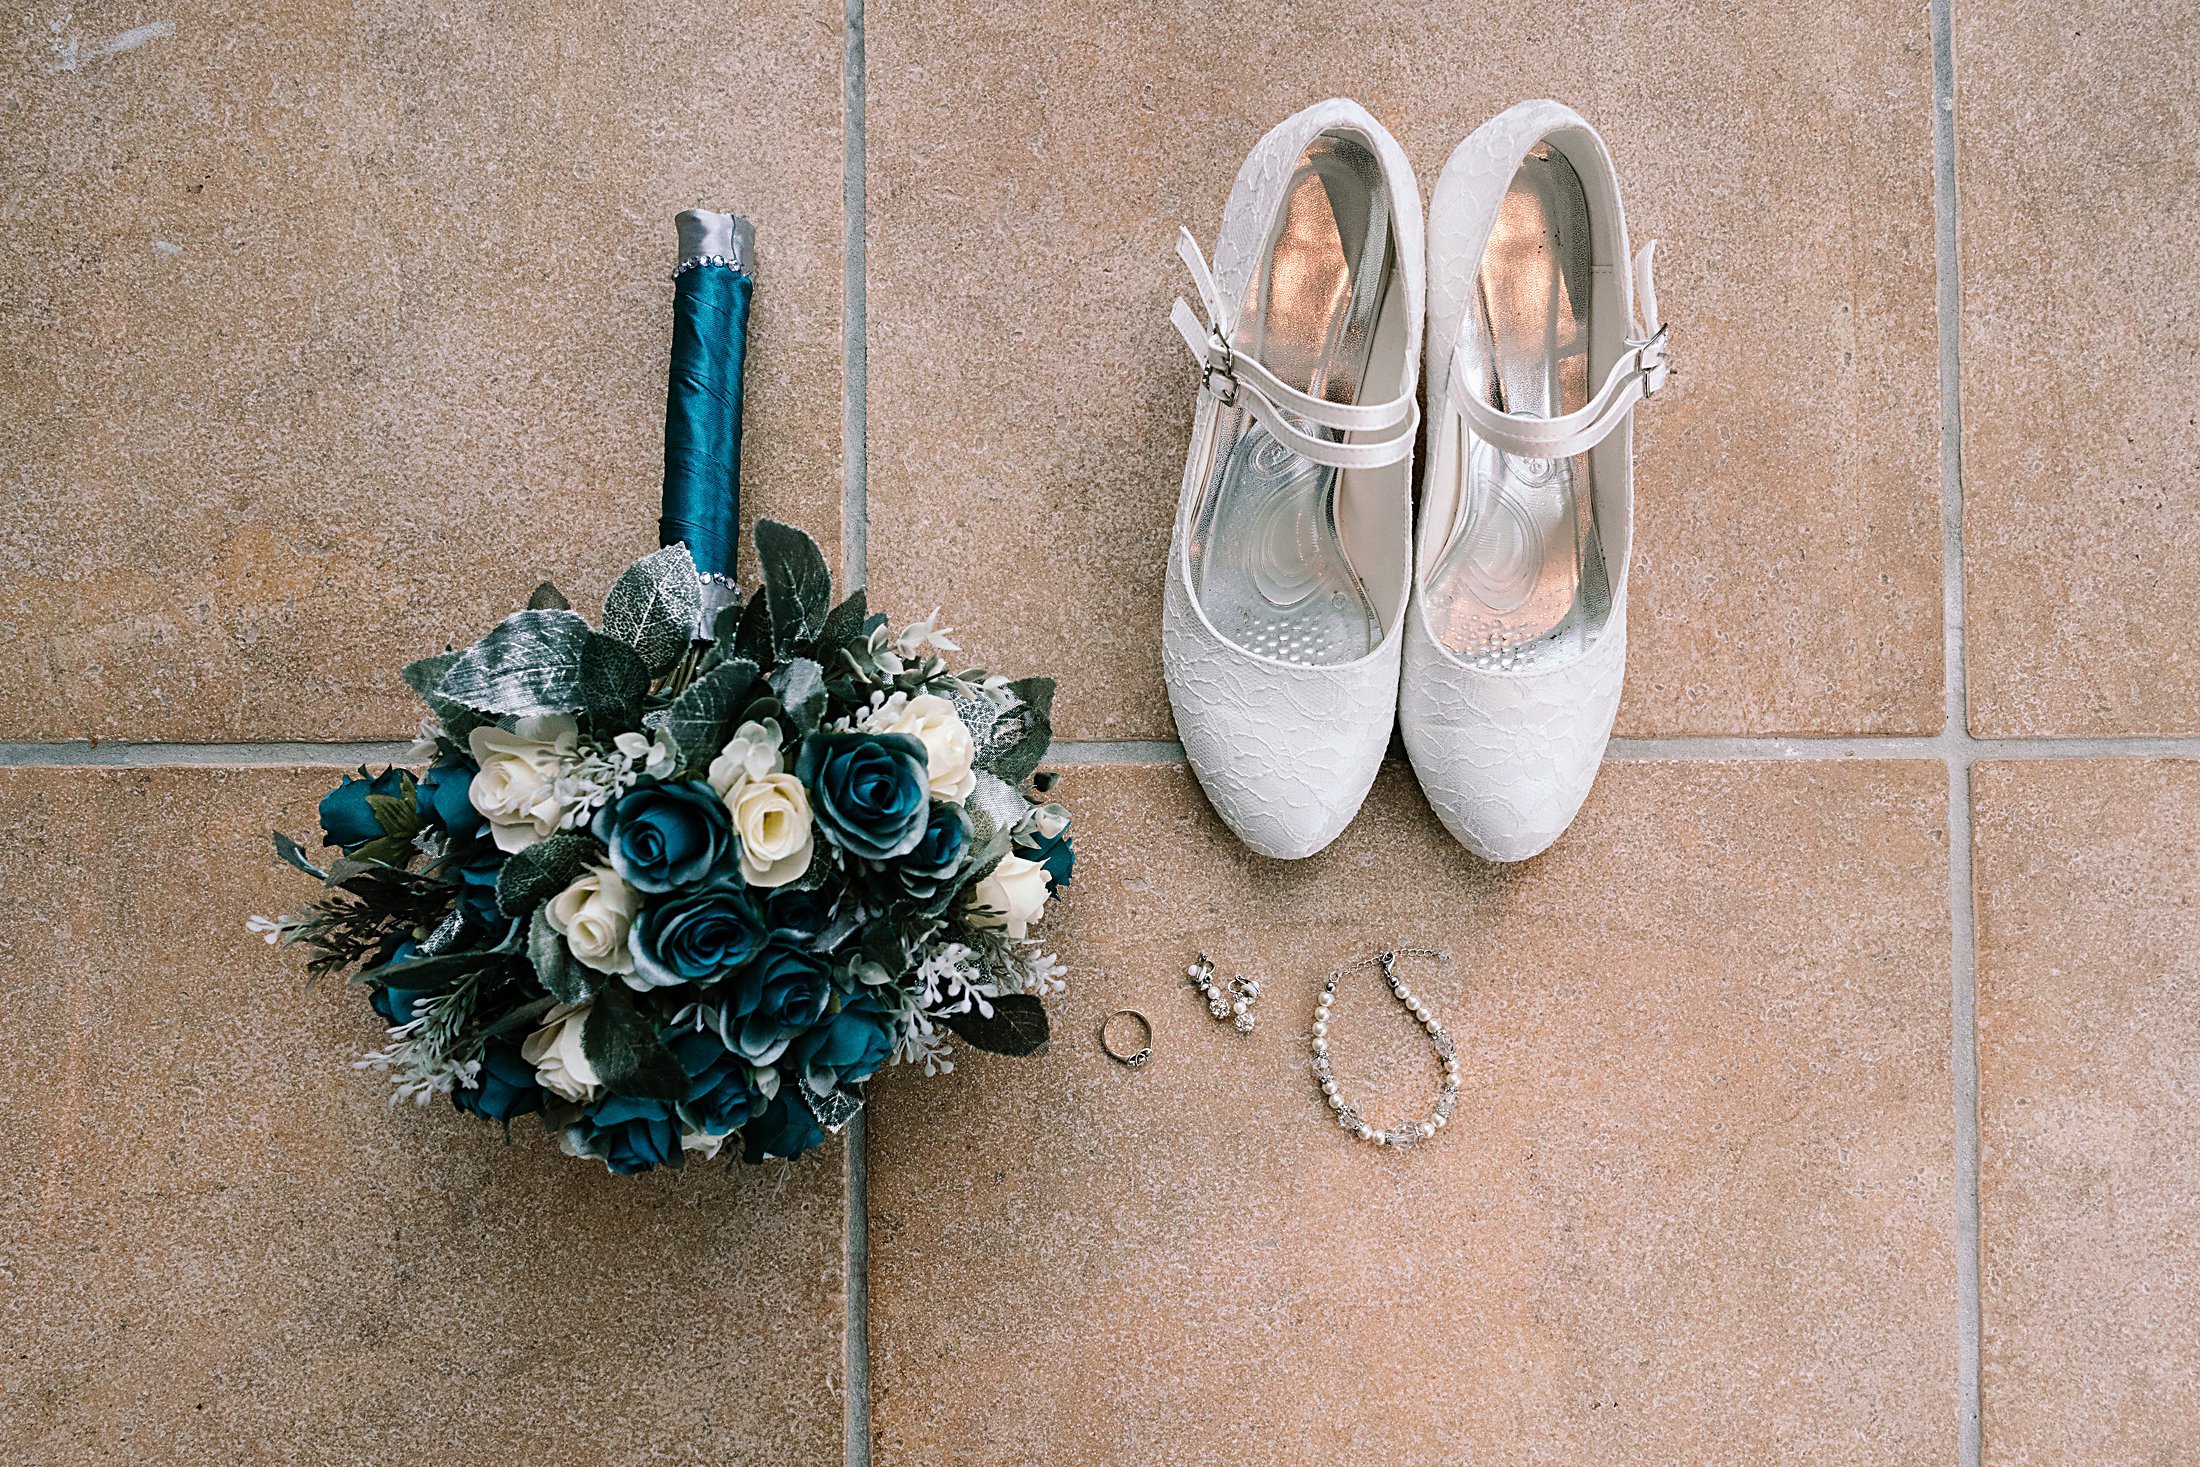 Brides shoes and flowers